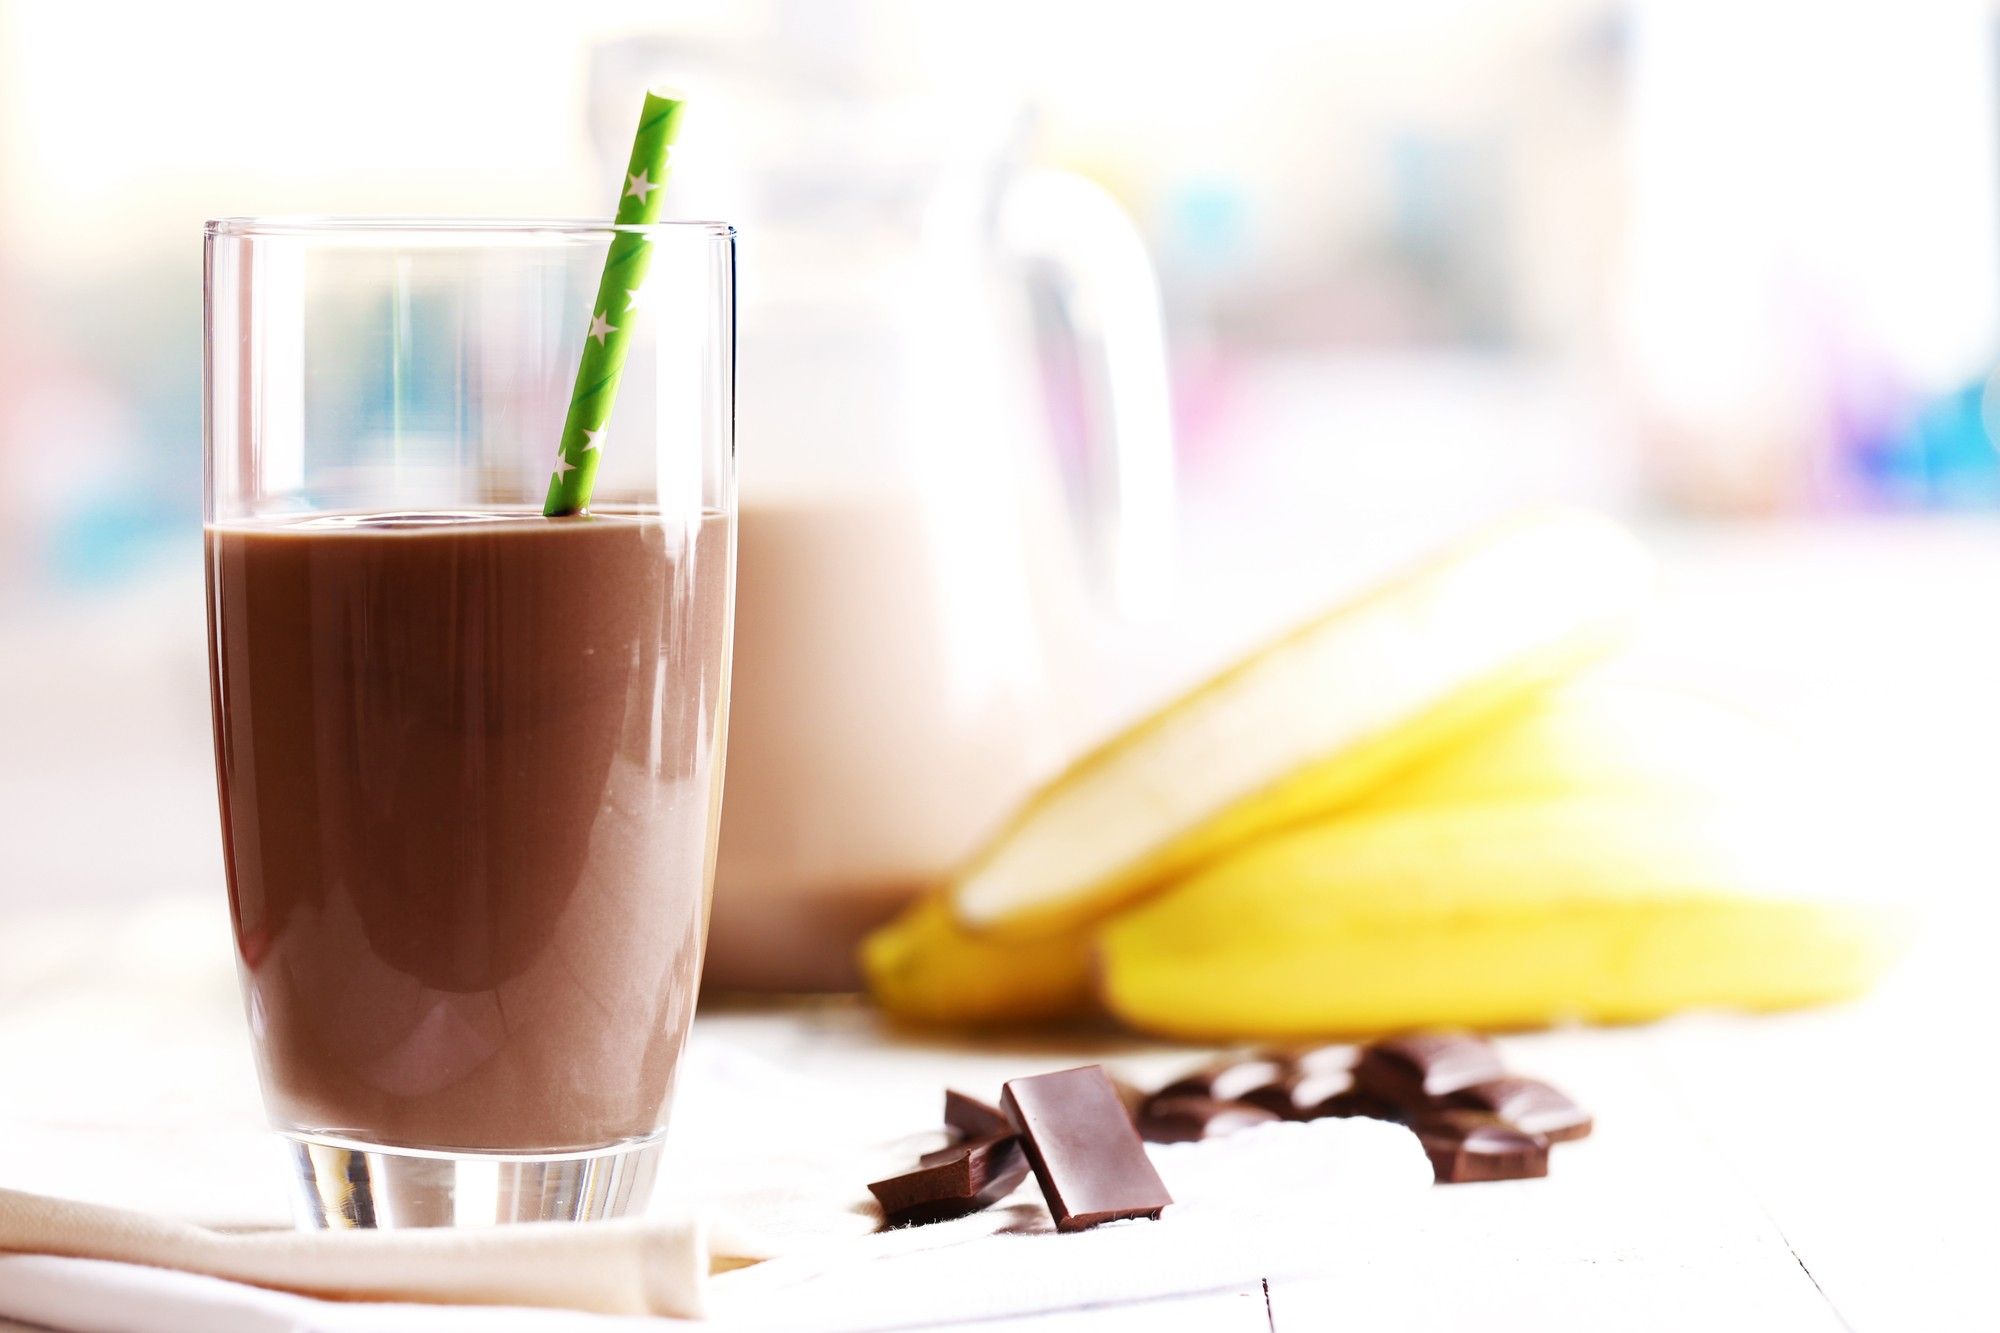 A chocolate milk recall has been made after sanitizer was discovered in the product.